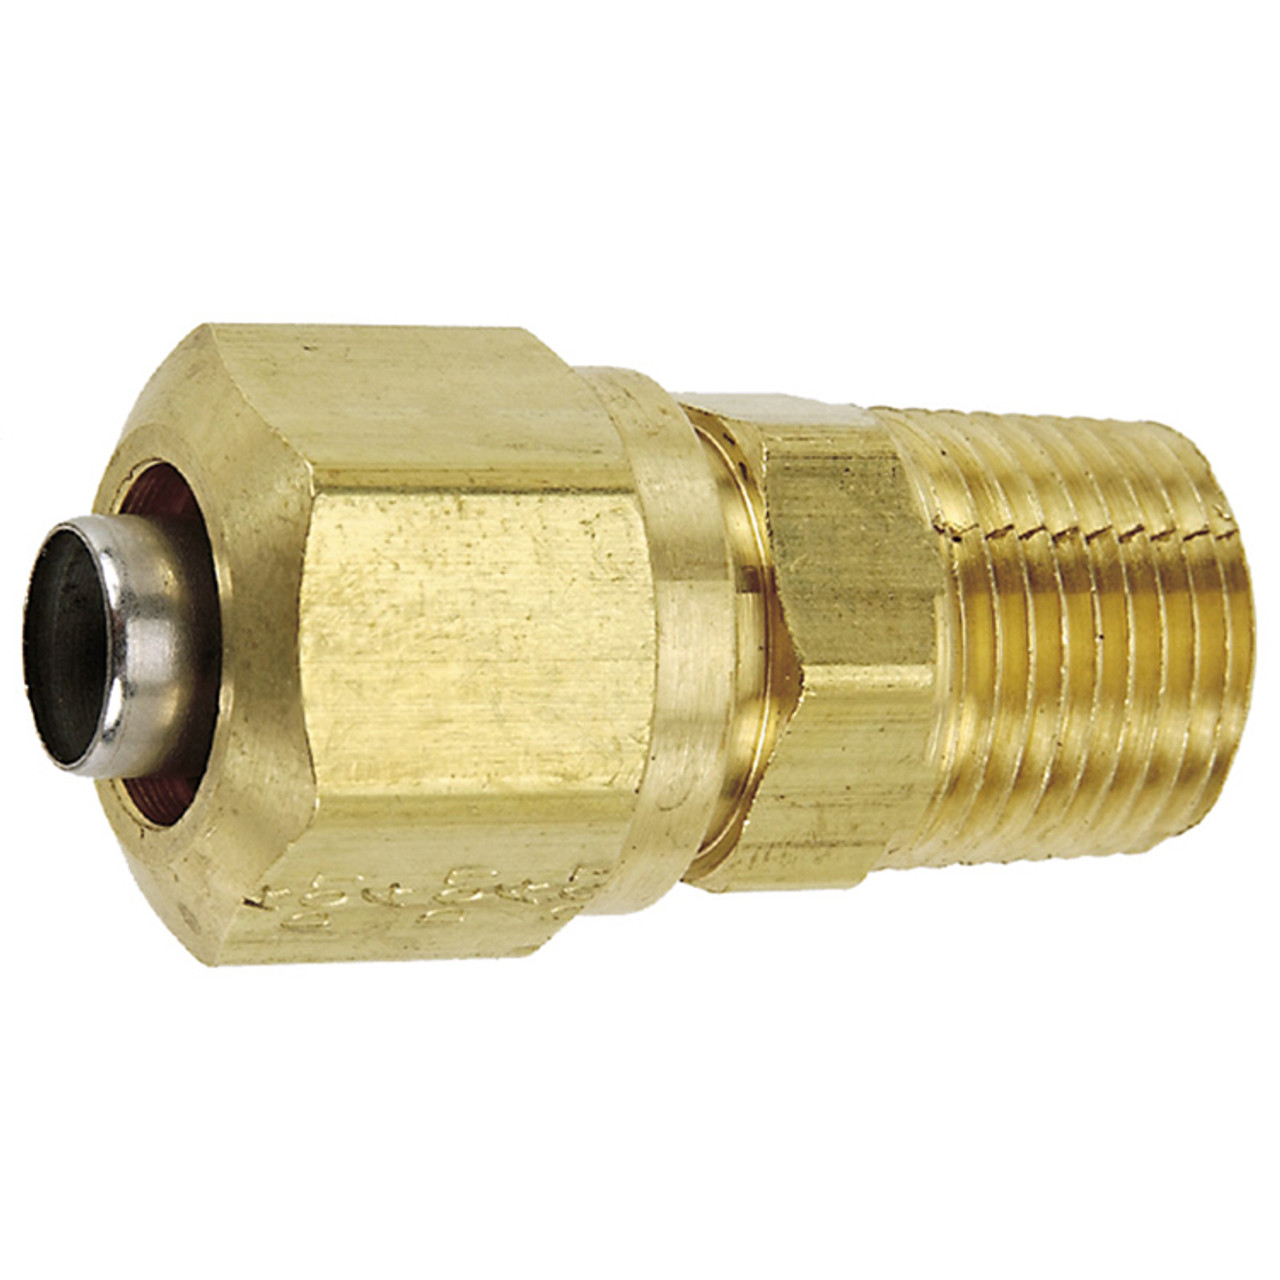 1/2 x 3/8" Brass DOT Male NPT - Compression Connector   G7016-08-06